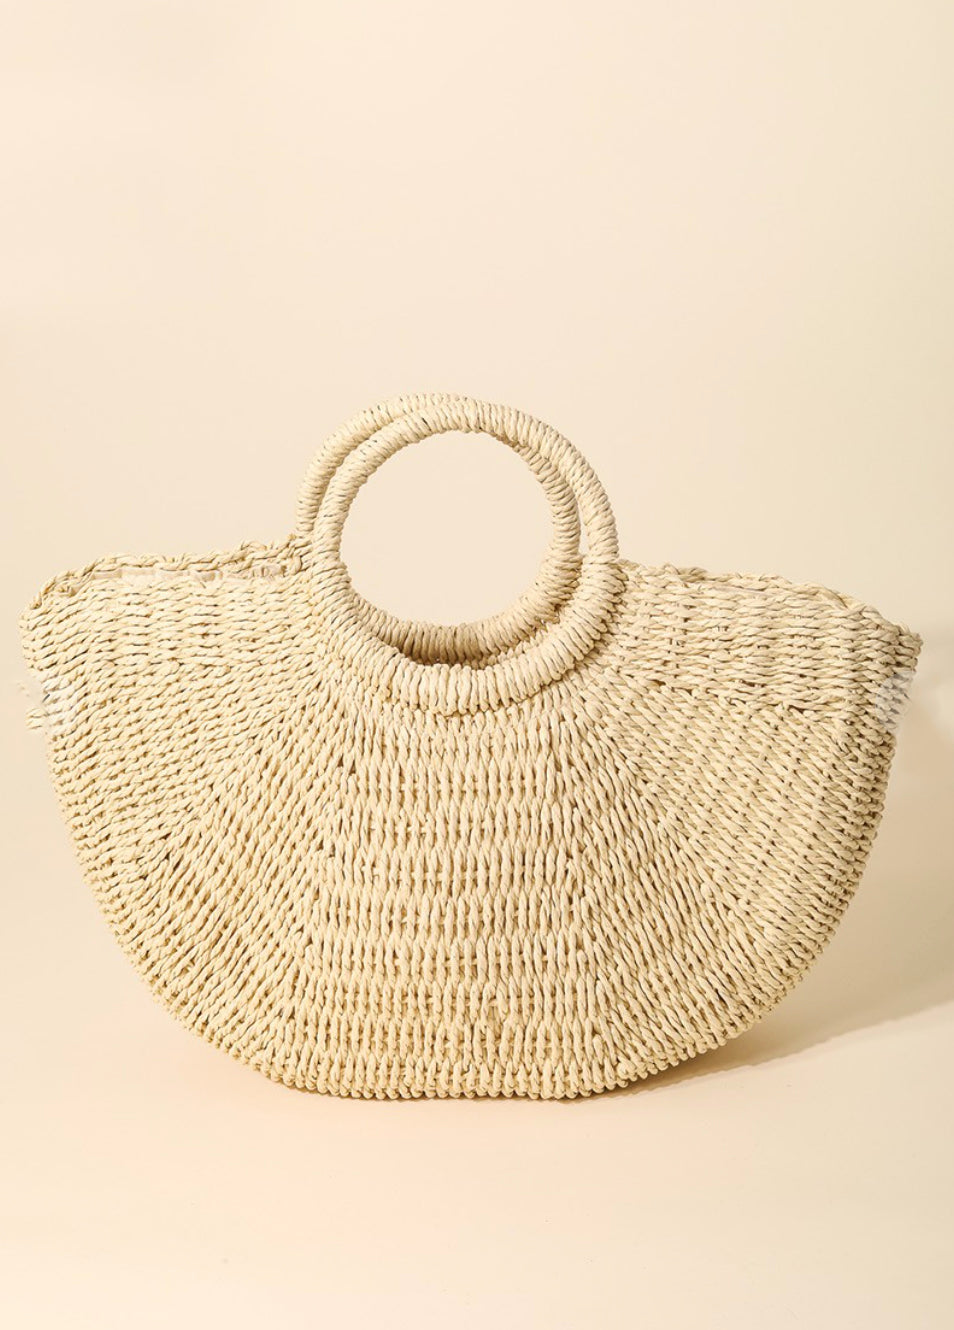 Half Moon Straw Tote, Two Colors